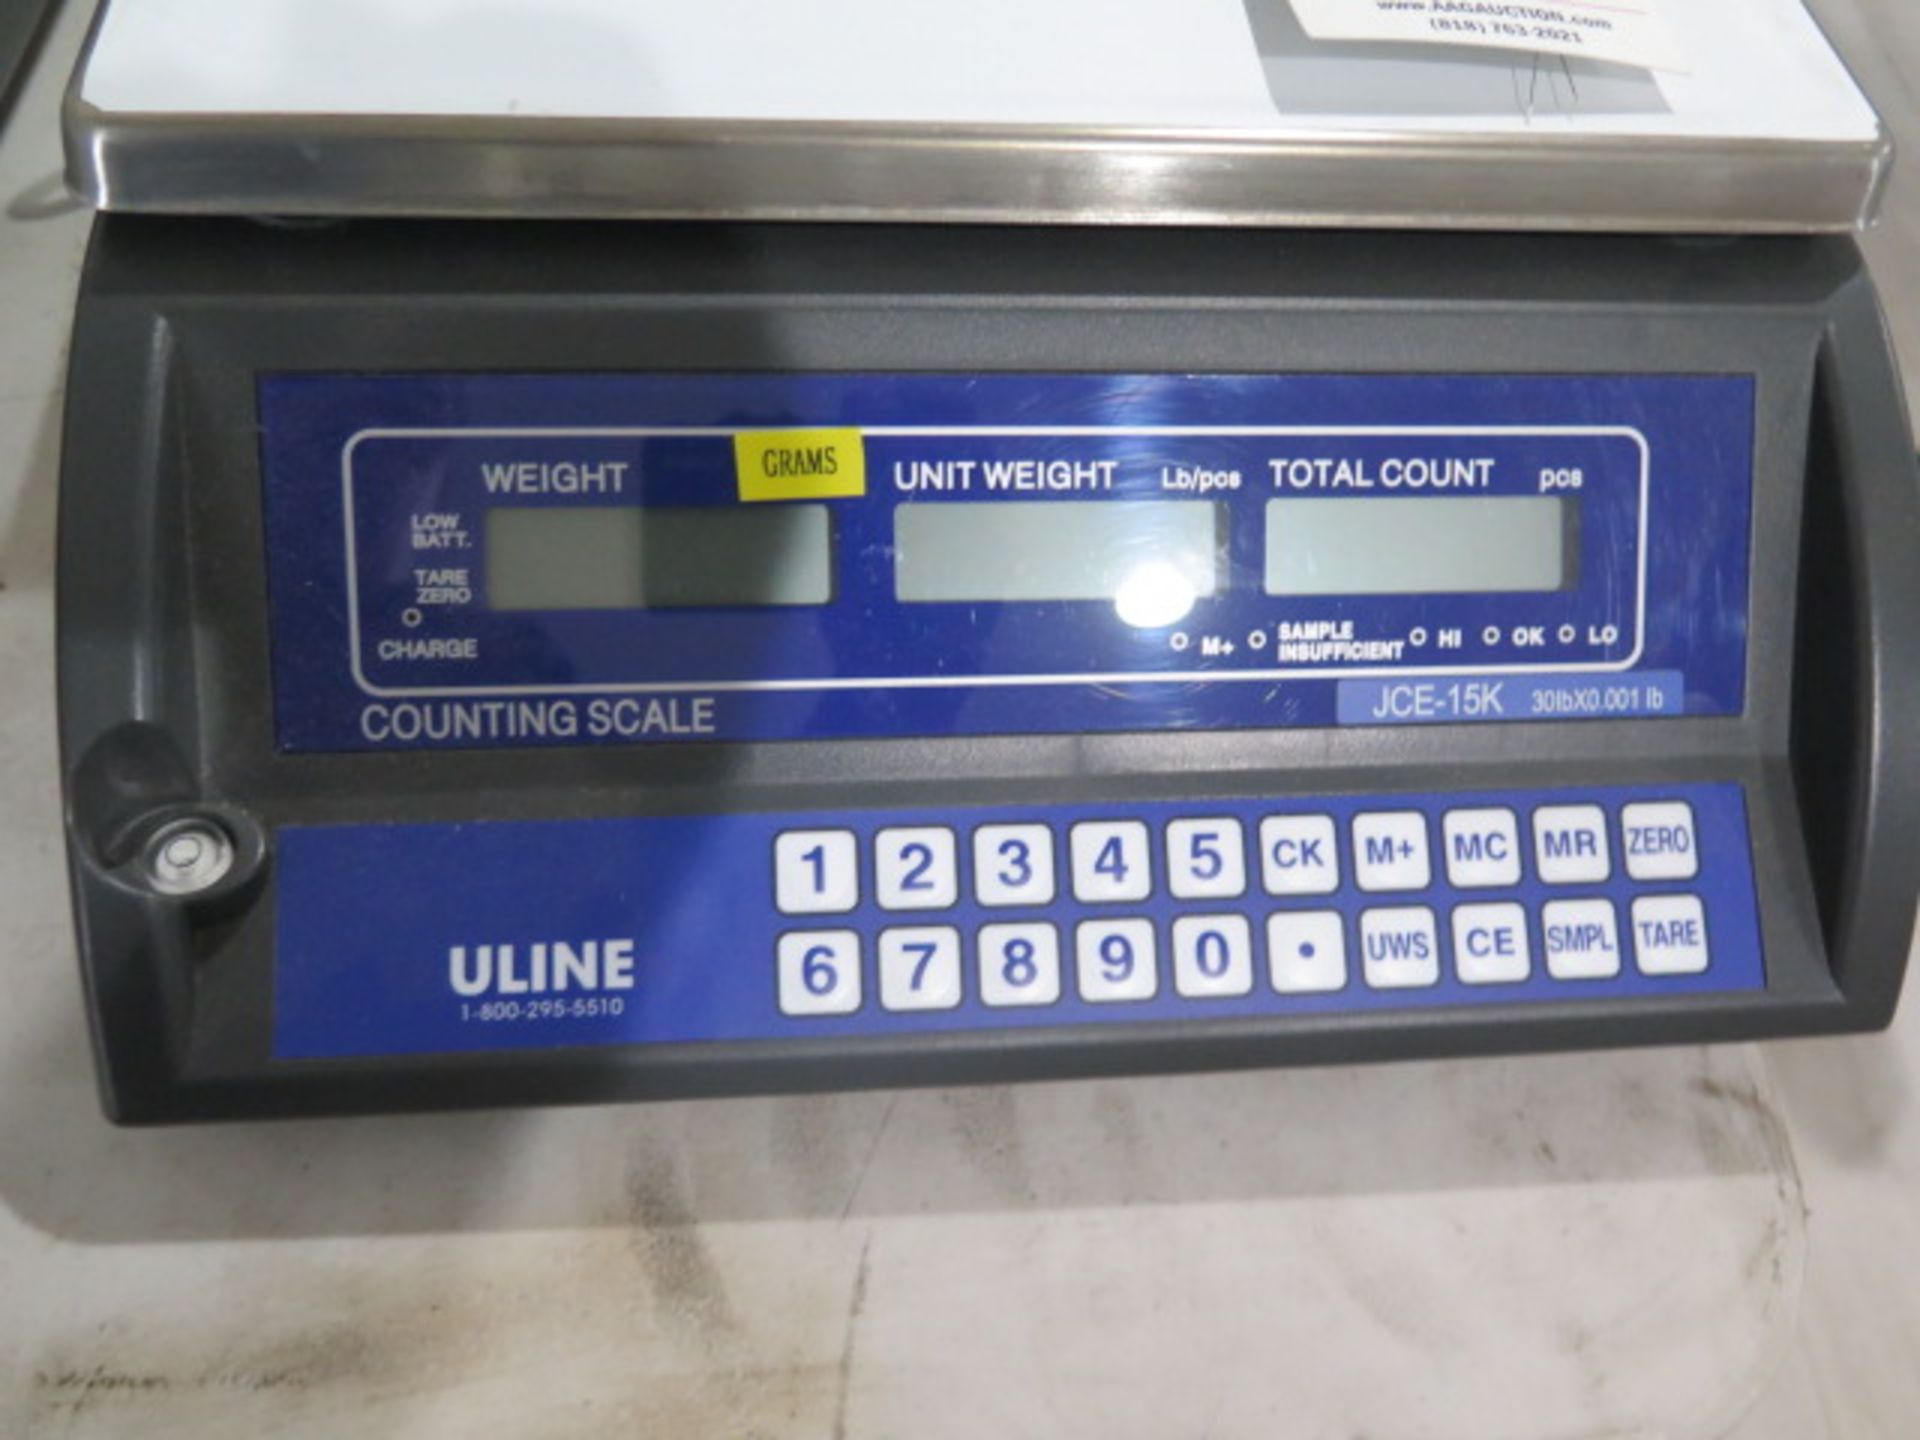 Uline JCE-15K 30 Lb Digital Counting Scale (SOLD AS-IS - NO WARRANTY) - Image 4 of 4